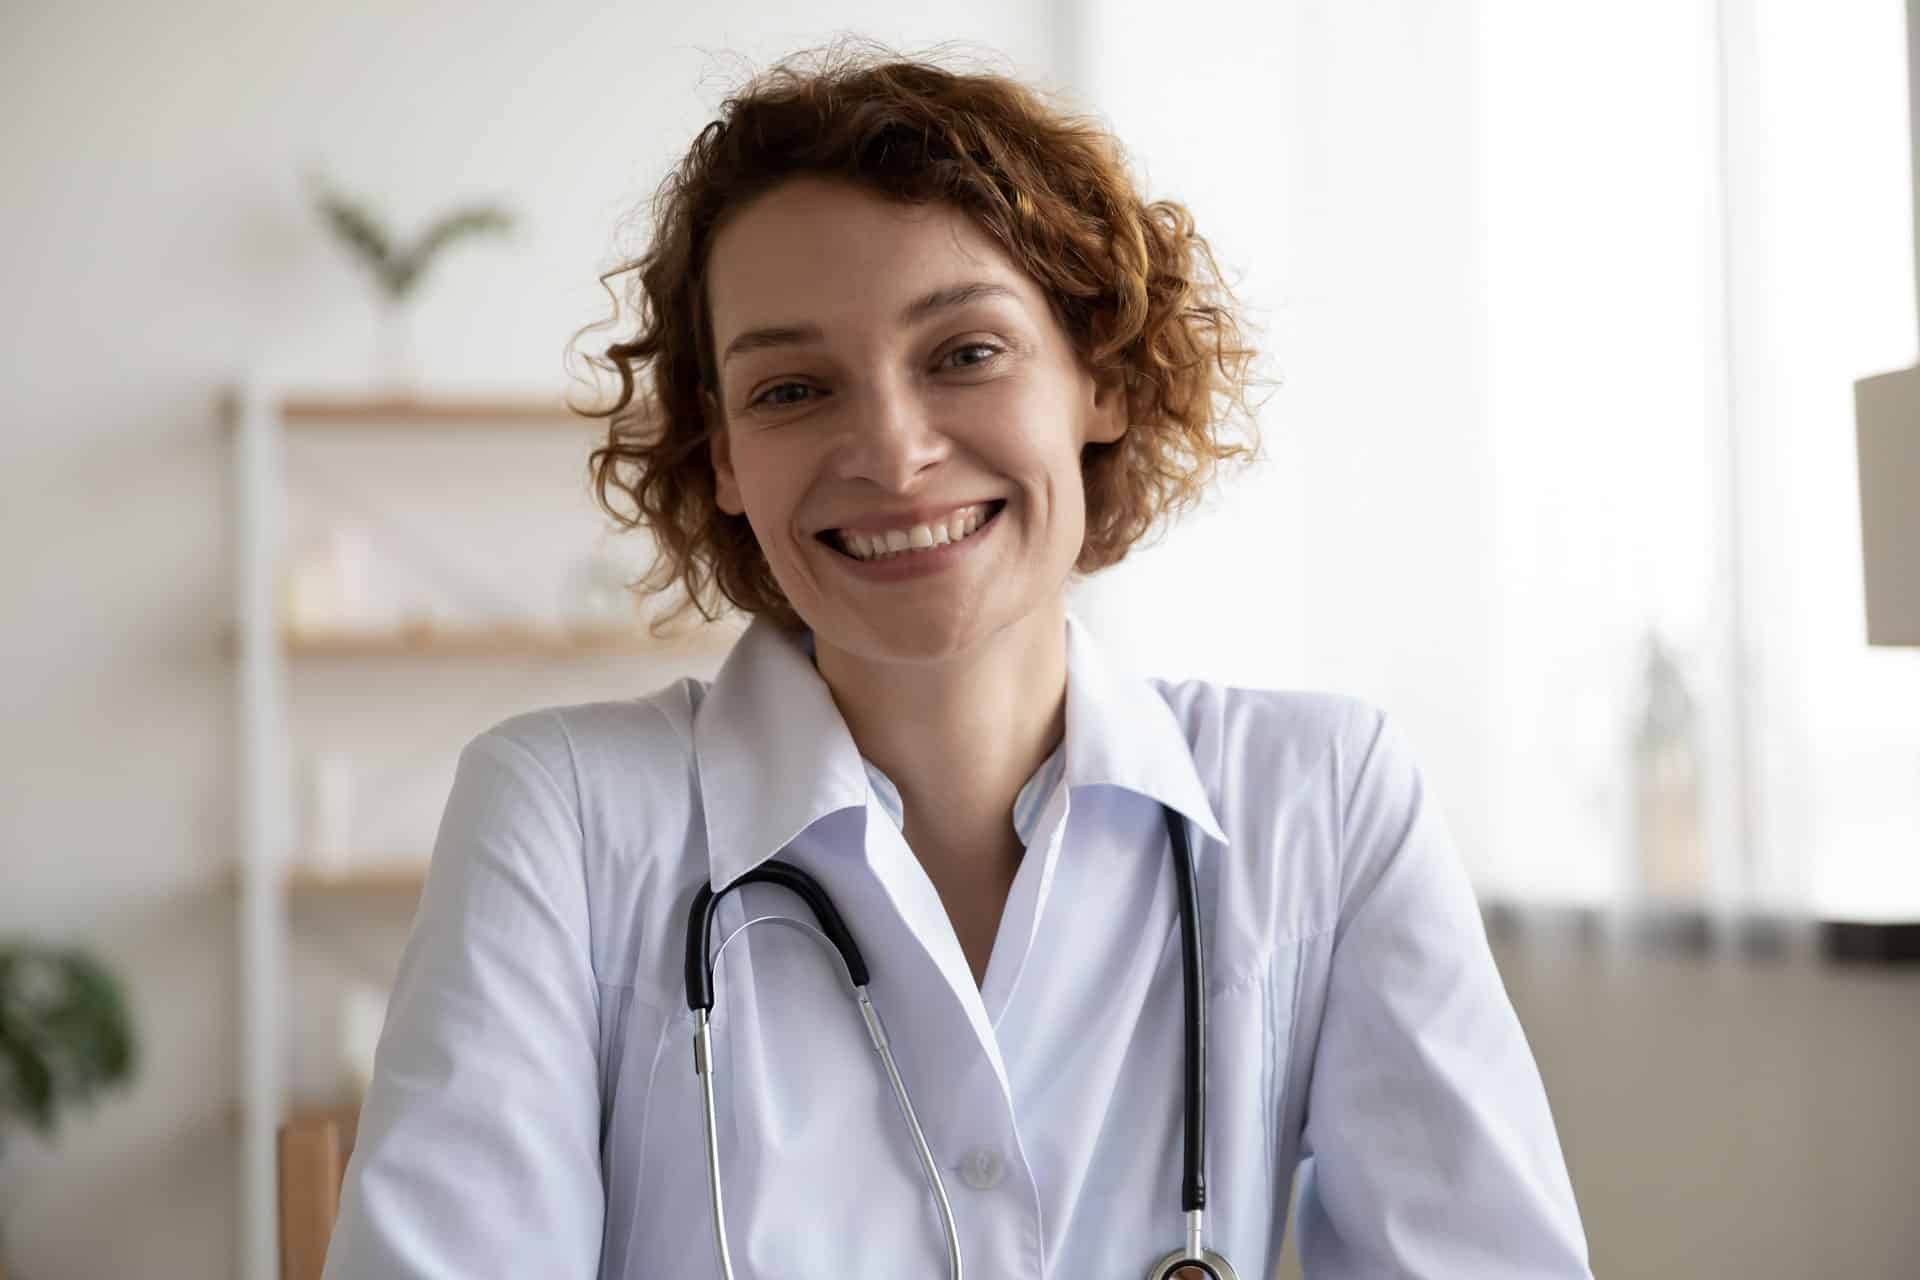 Happy woman doctor wears white medical coat looking at camera